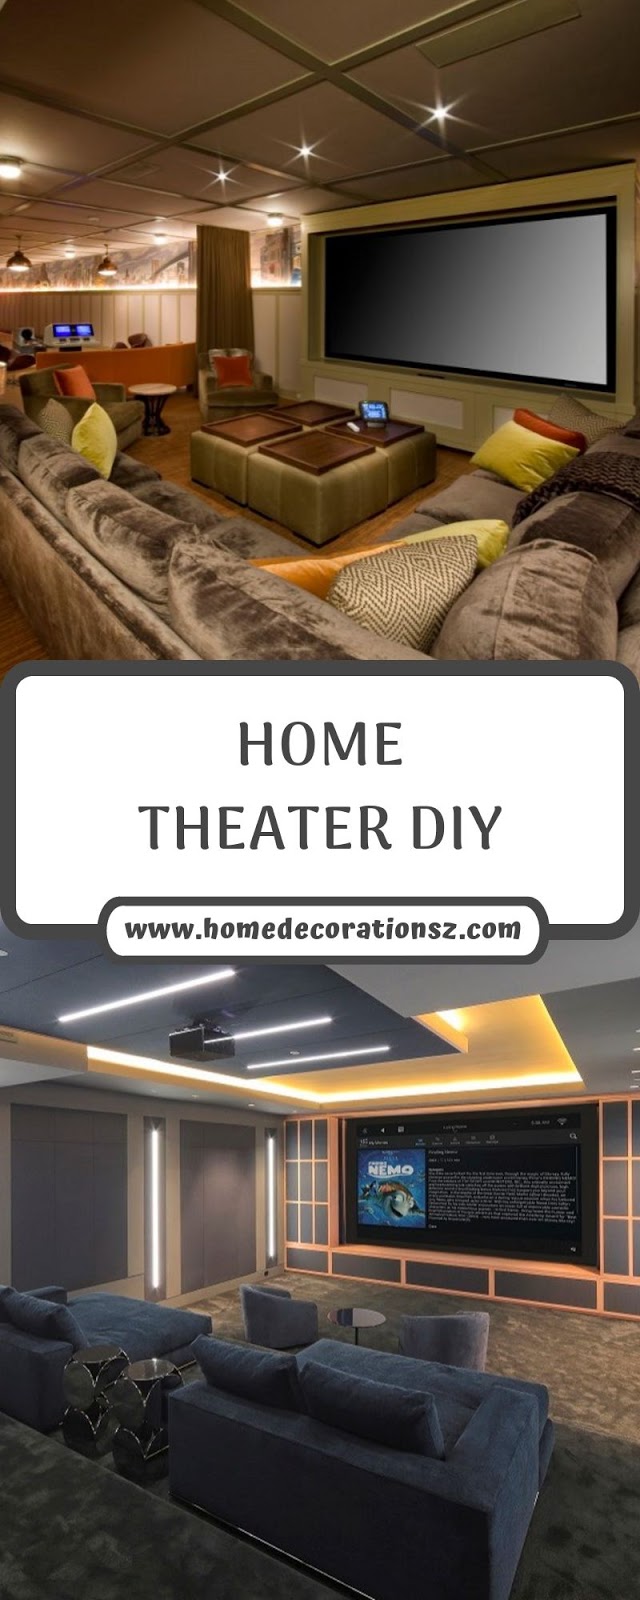 HOME THEATER DIY